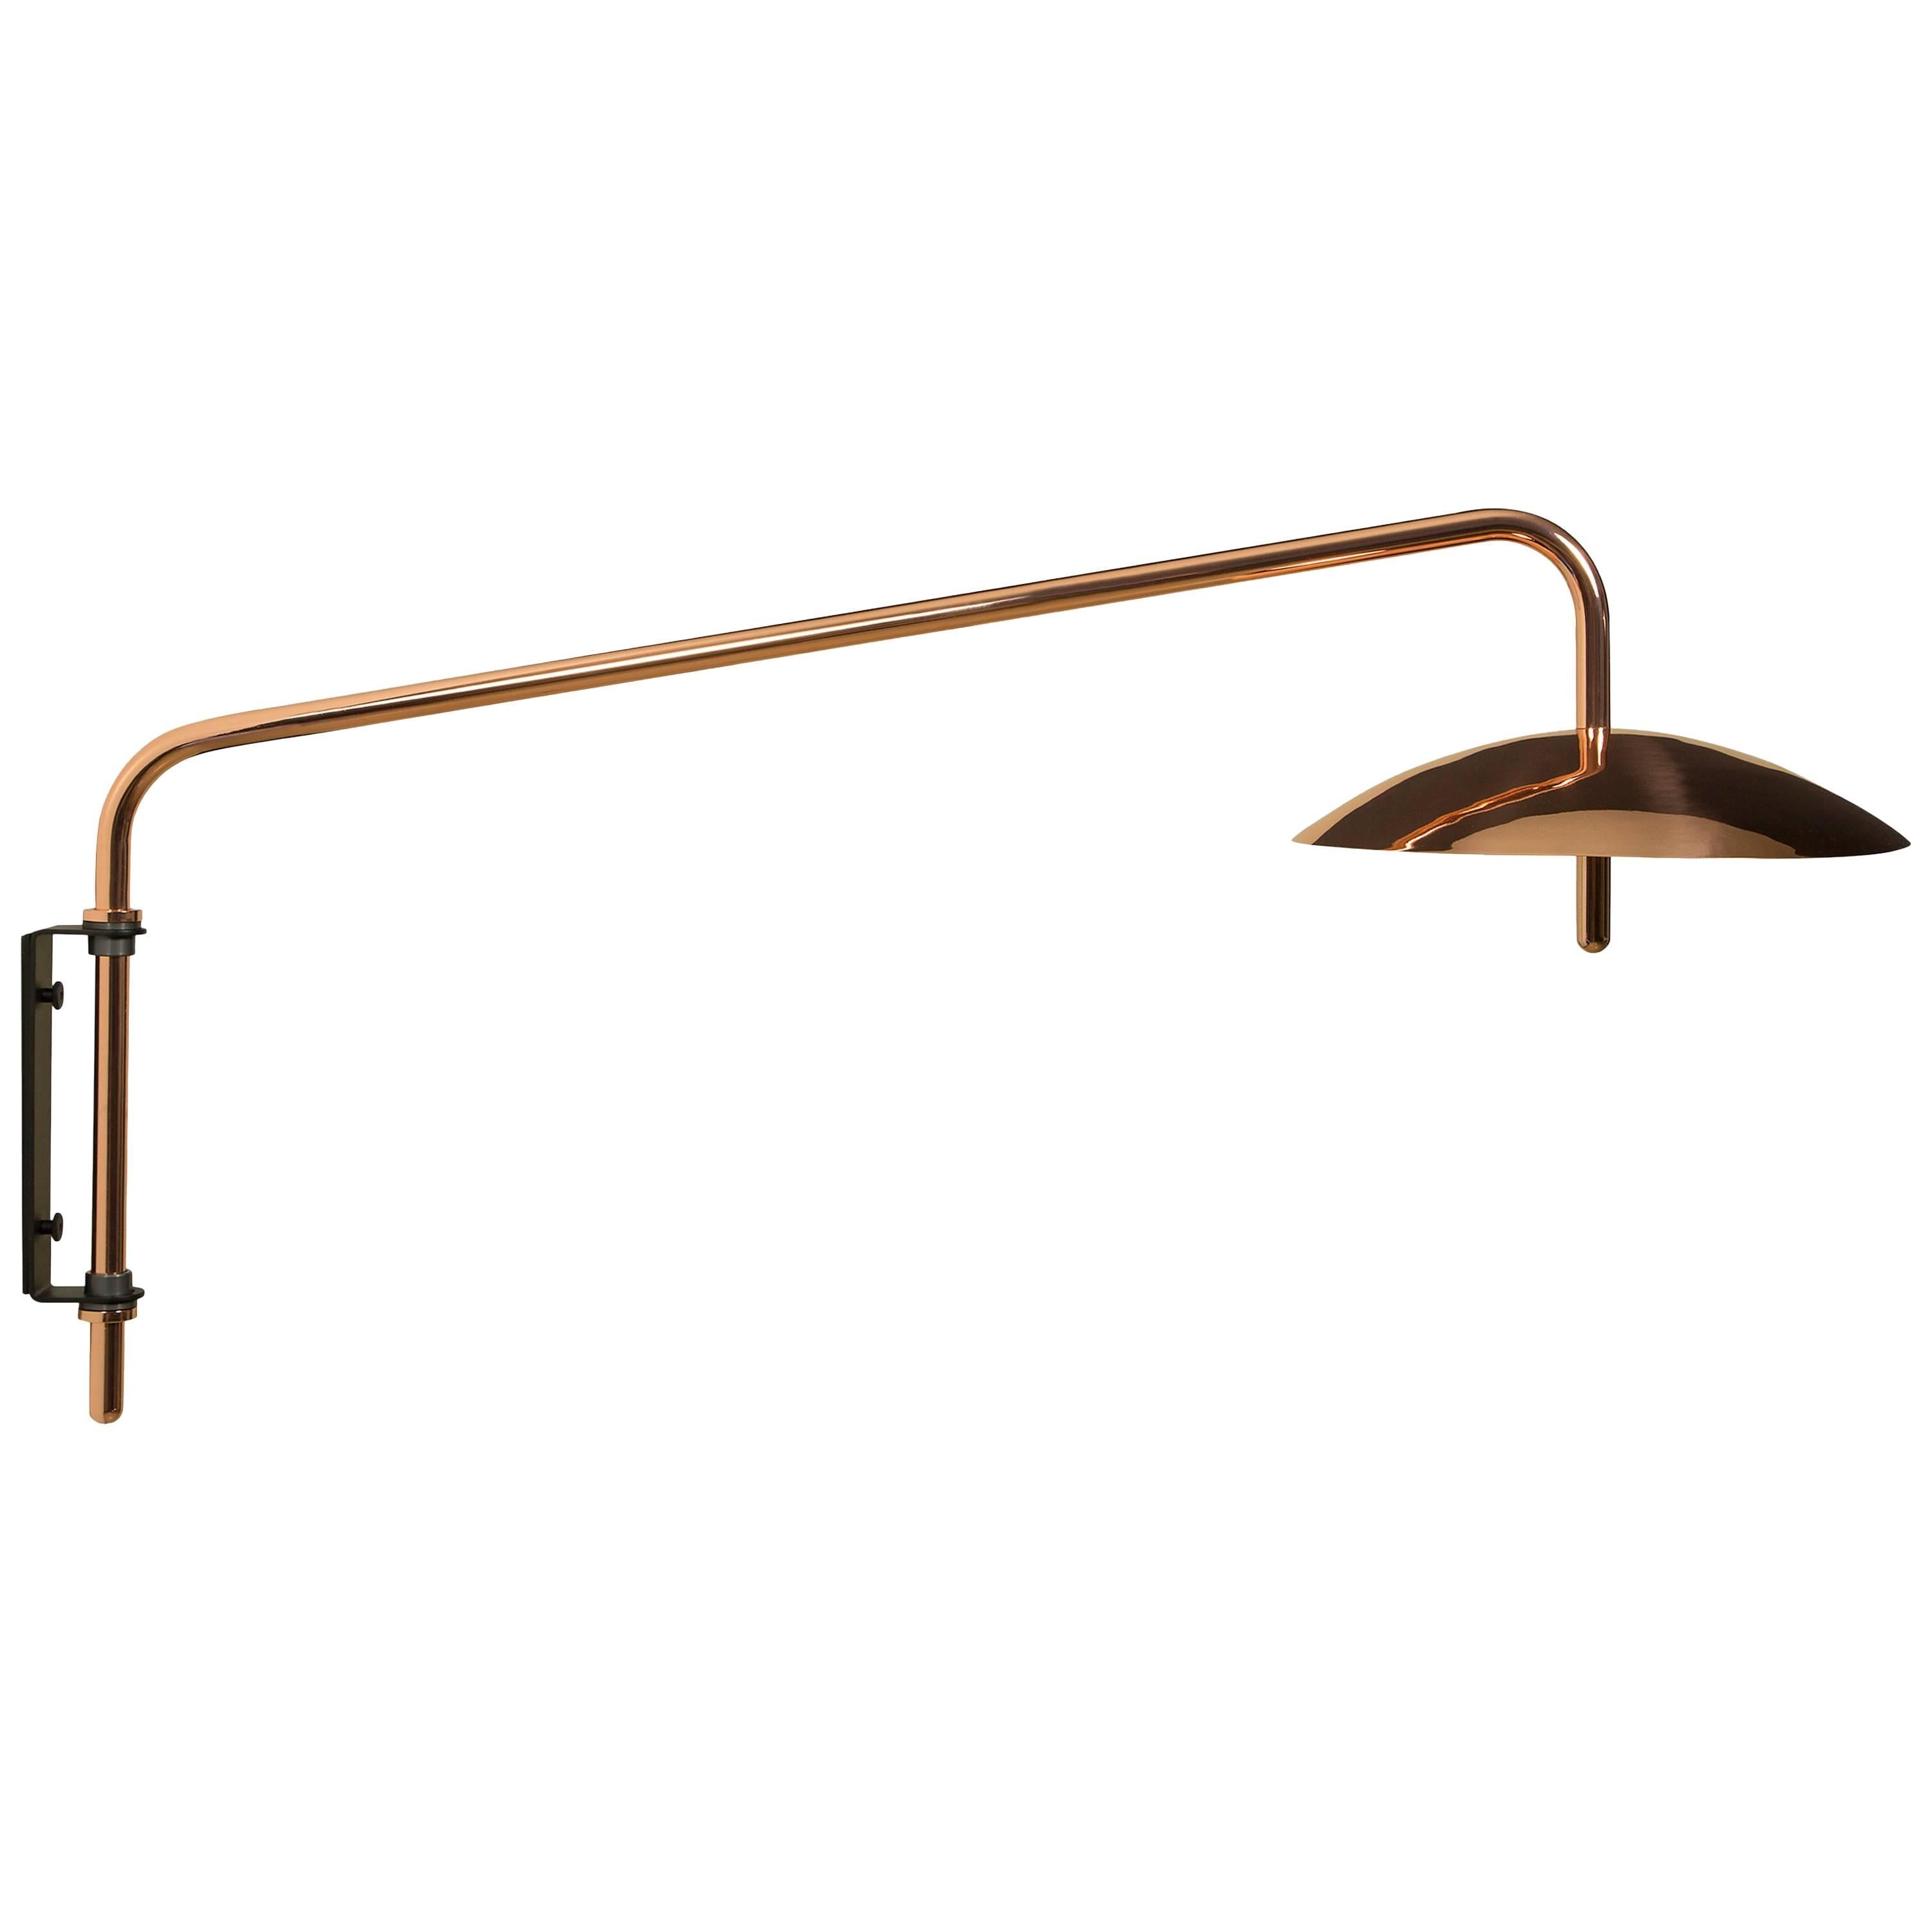 Modern Signal Swing Arm Sconce, Black x Nickel, Short, Hardwire, Souda, Made to Order For Sale